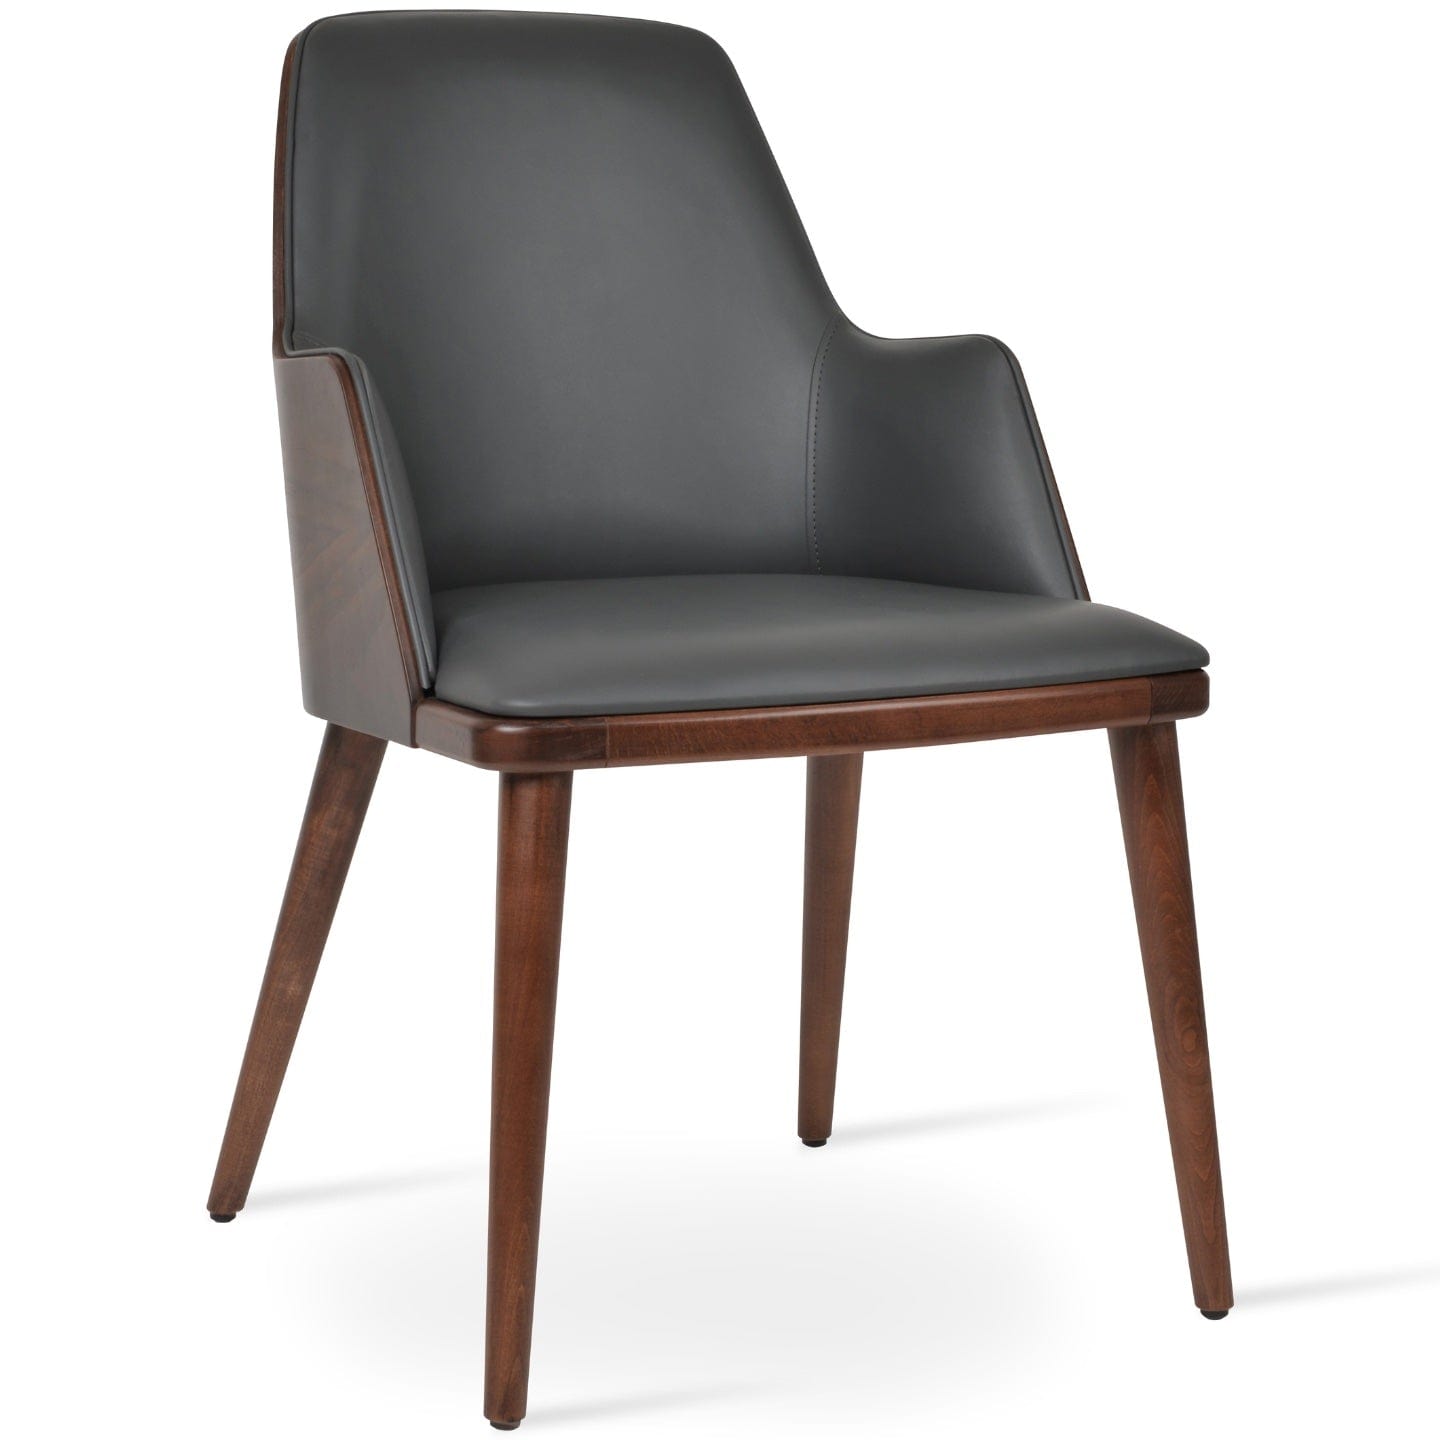 sohoConcept Kitchen & Dining Room Chairs RomanoW Wood Dining ArmChair | RomanoW Wood Modern Dining Chairs in Canada Grey